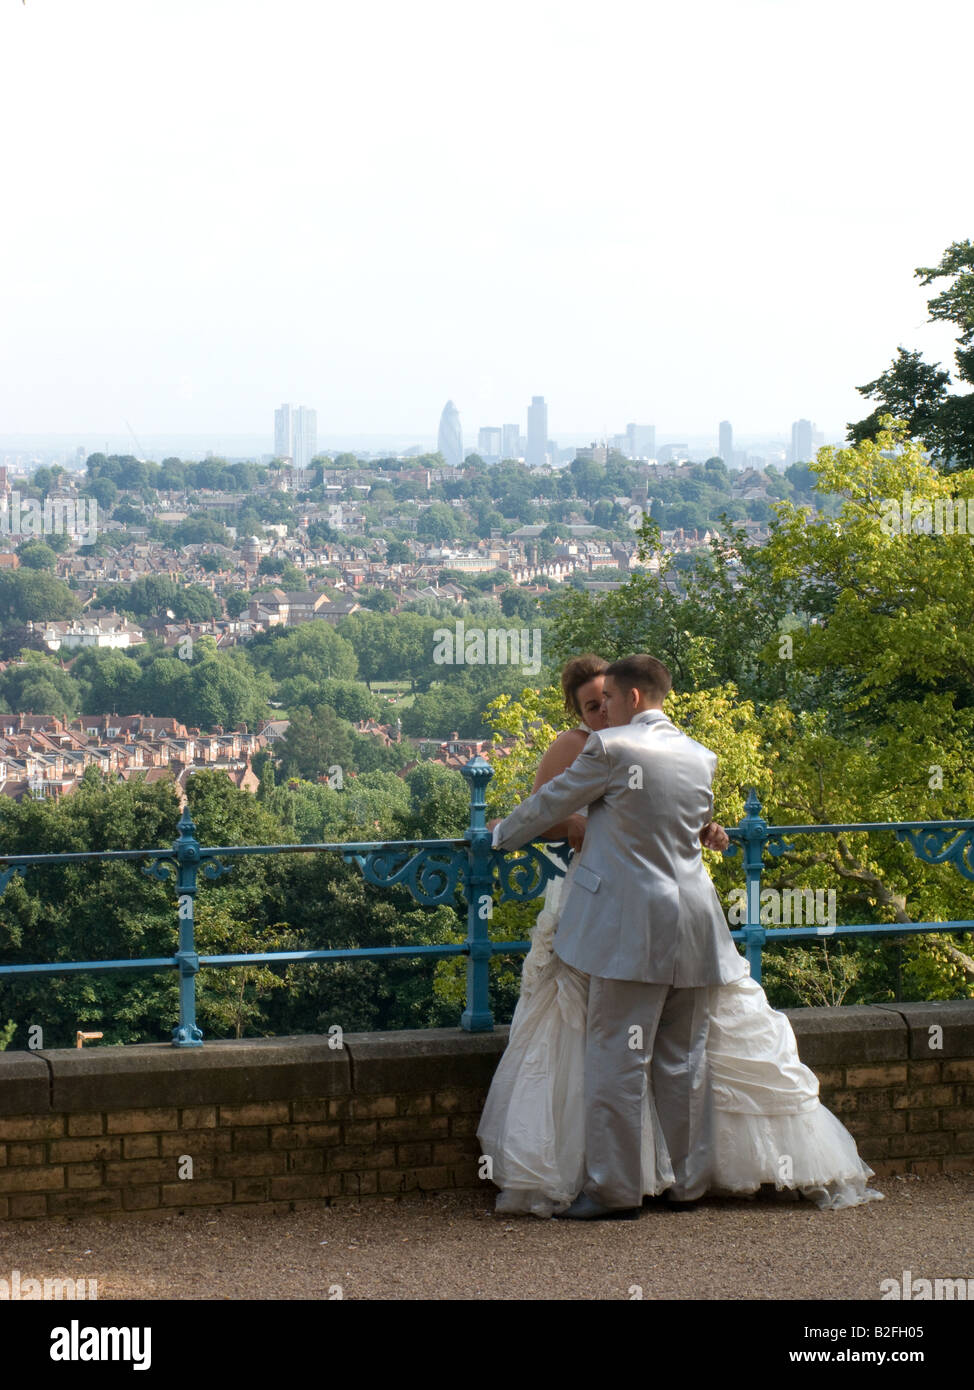 A just married couple pose for wedding photographs at Alexandra Palace, London Stock Photo